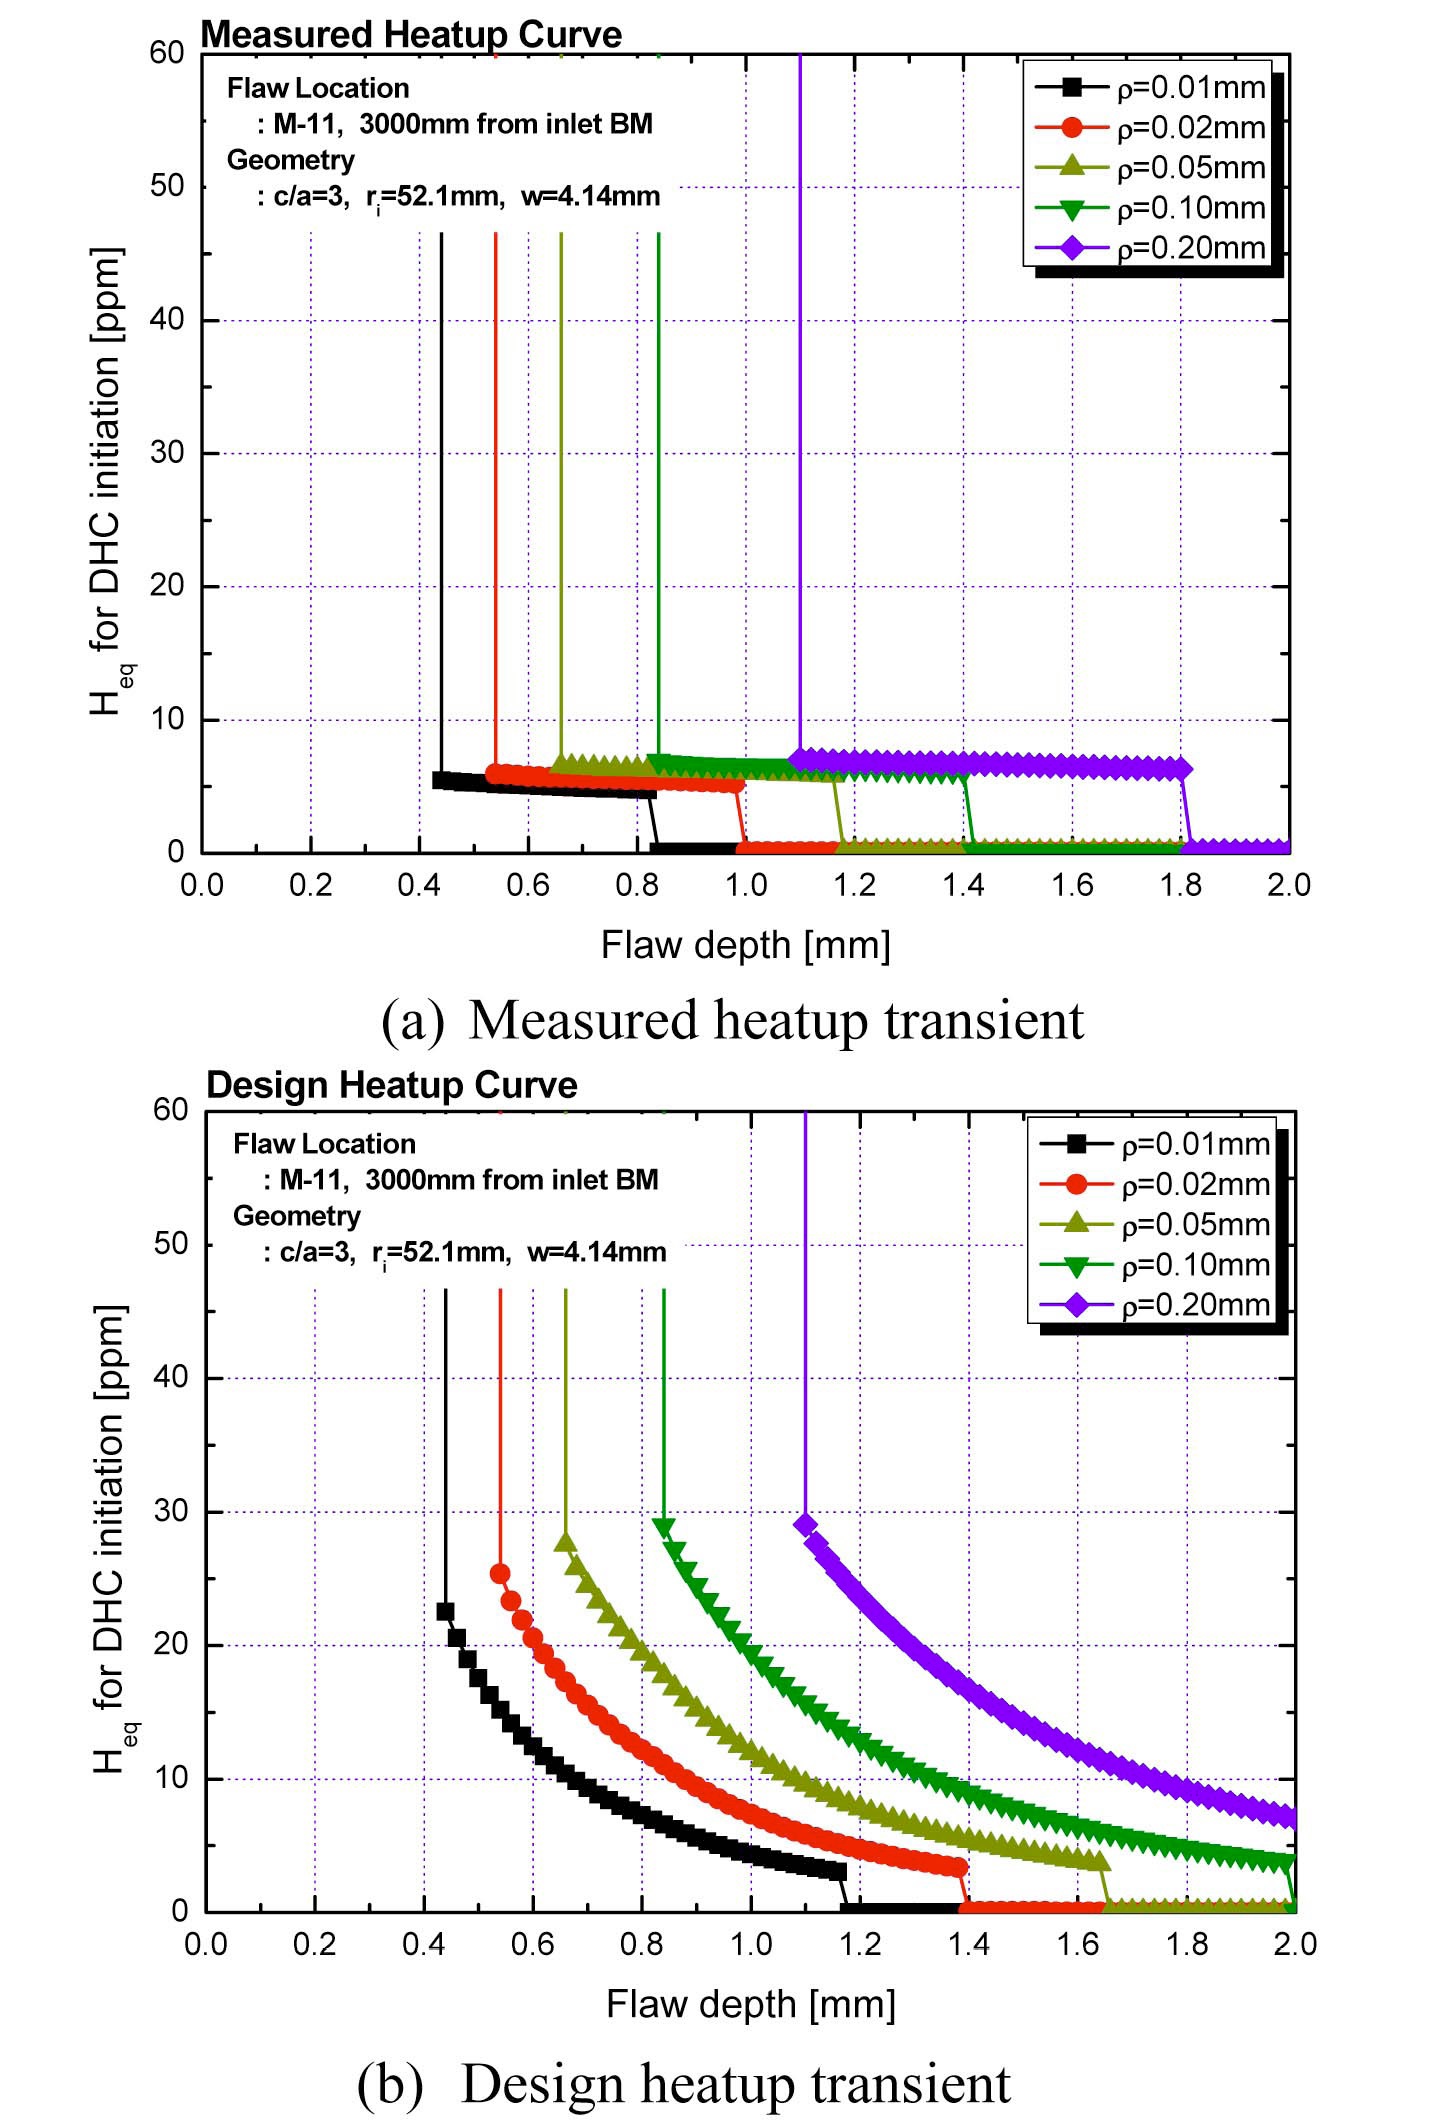 Threshold Bulk Heq for DHC Initiation under Plant Heatup Transients